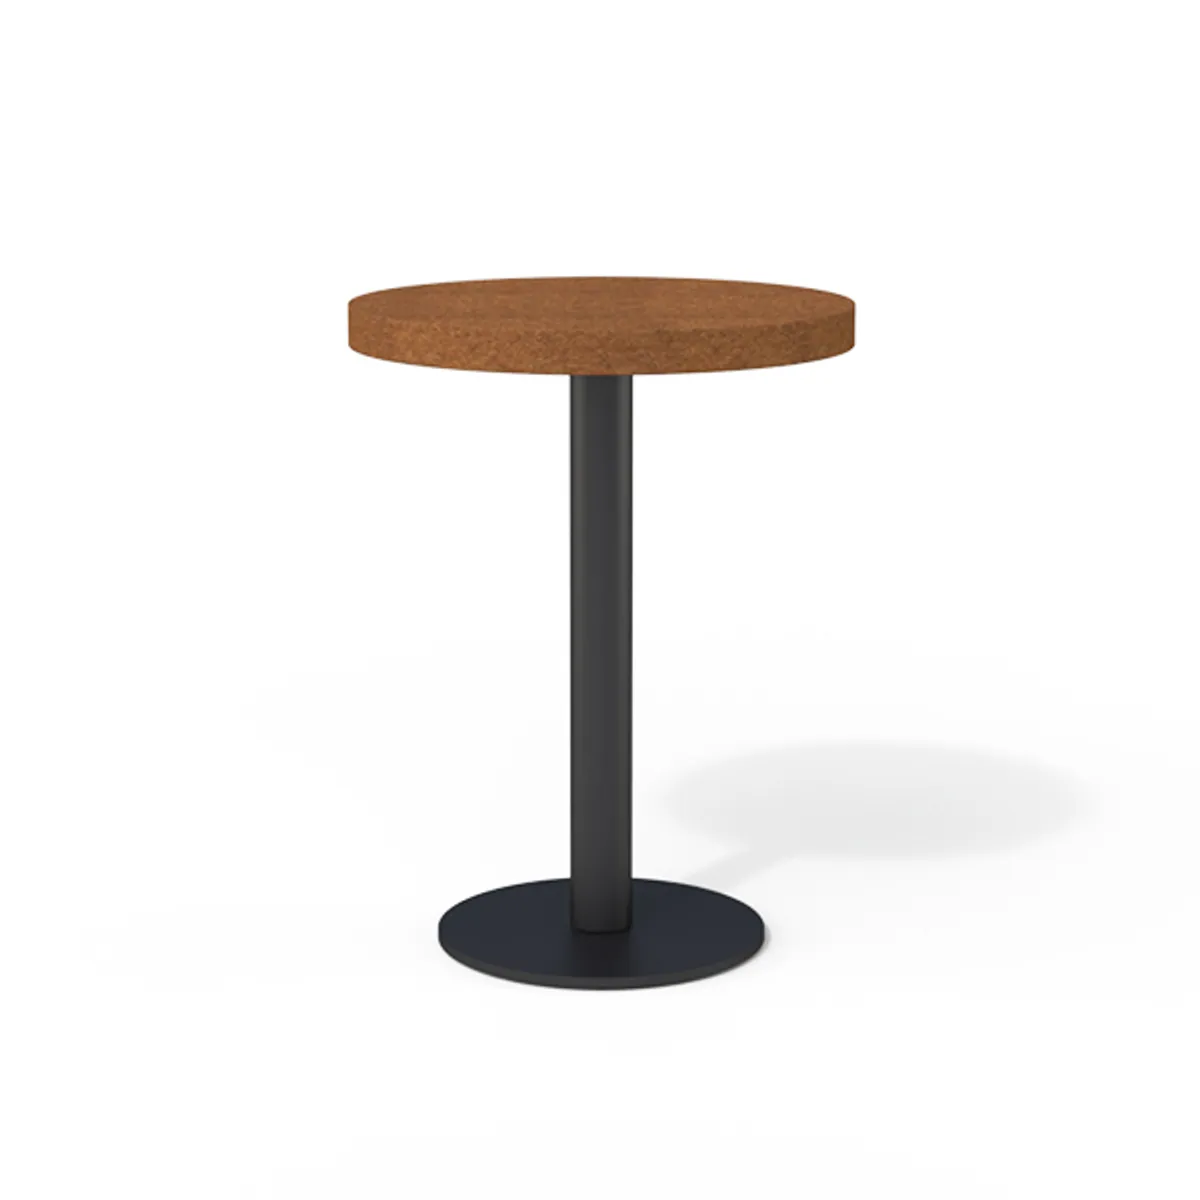 Cork Spoke Table Exclusive To Inside Out Contracts 0145